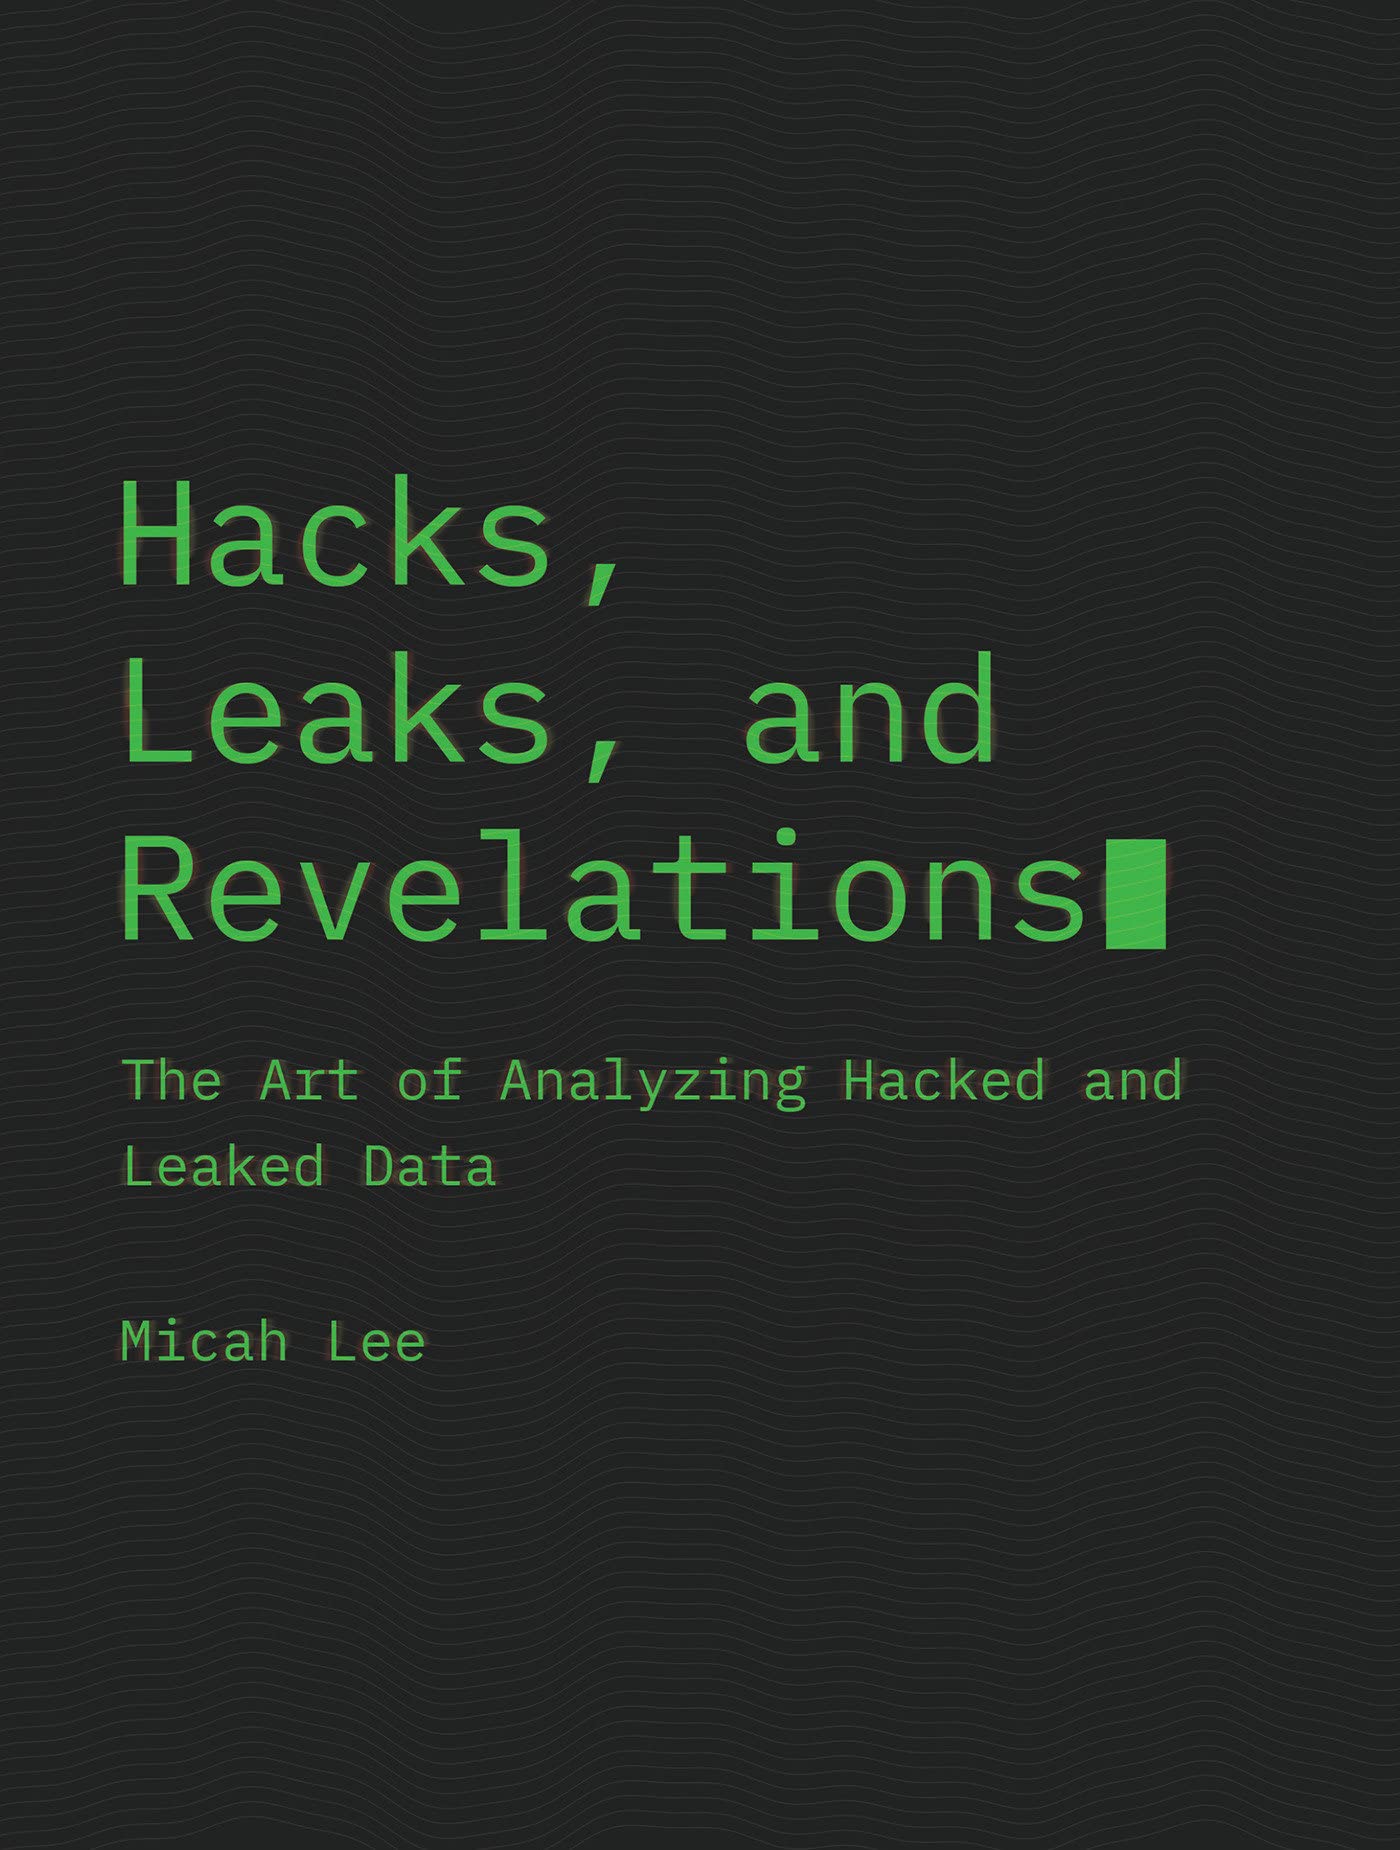 Hacks, Leaks, and Revelations: The Art of Analyzing Hacked and Leaked Data